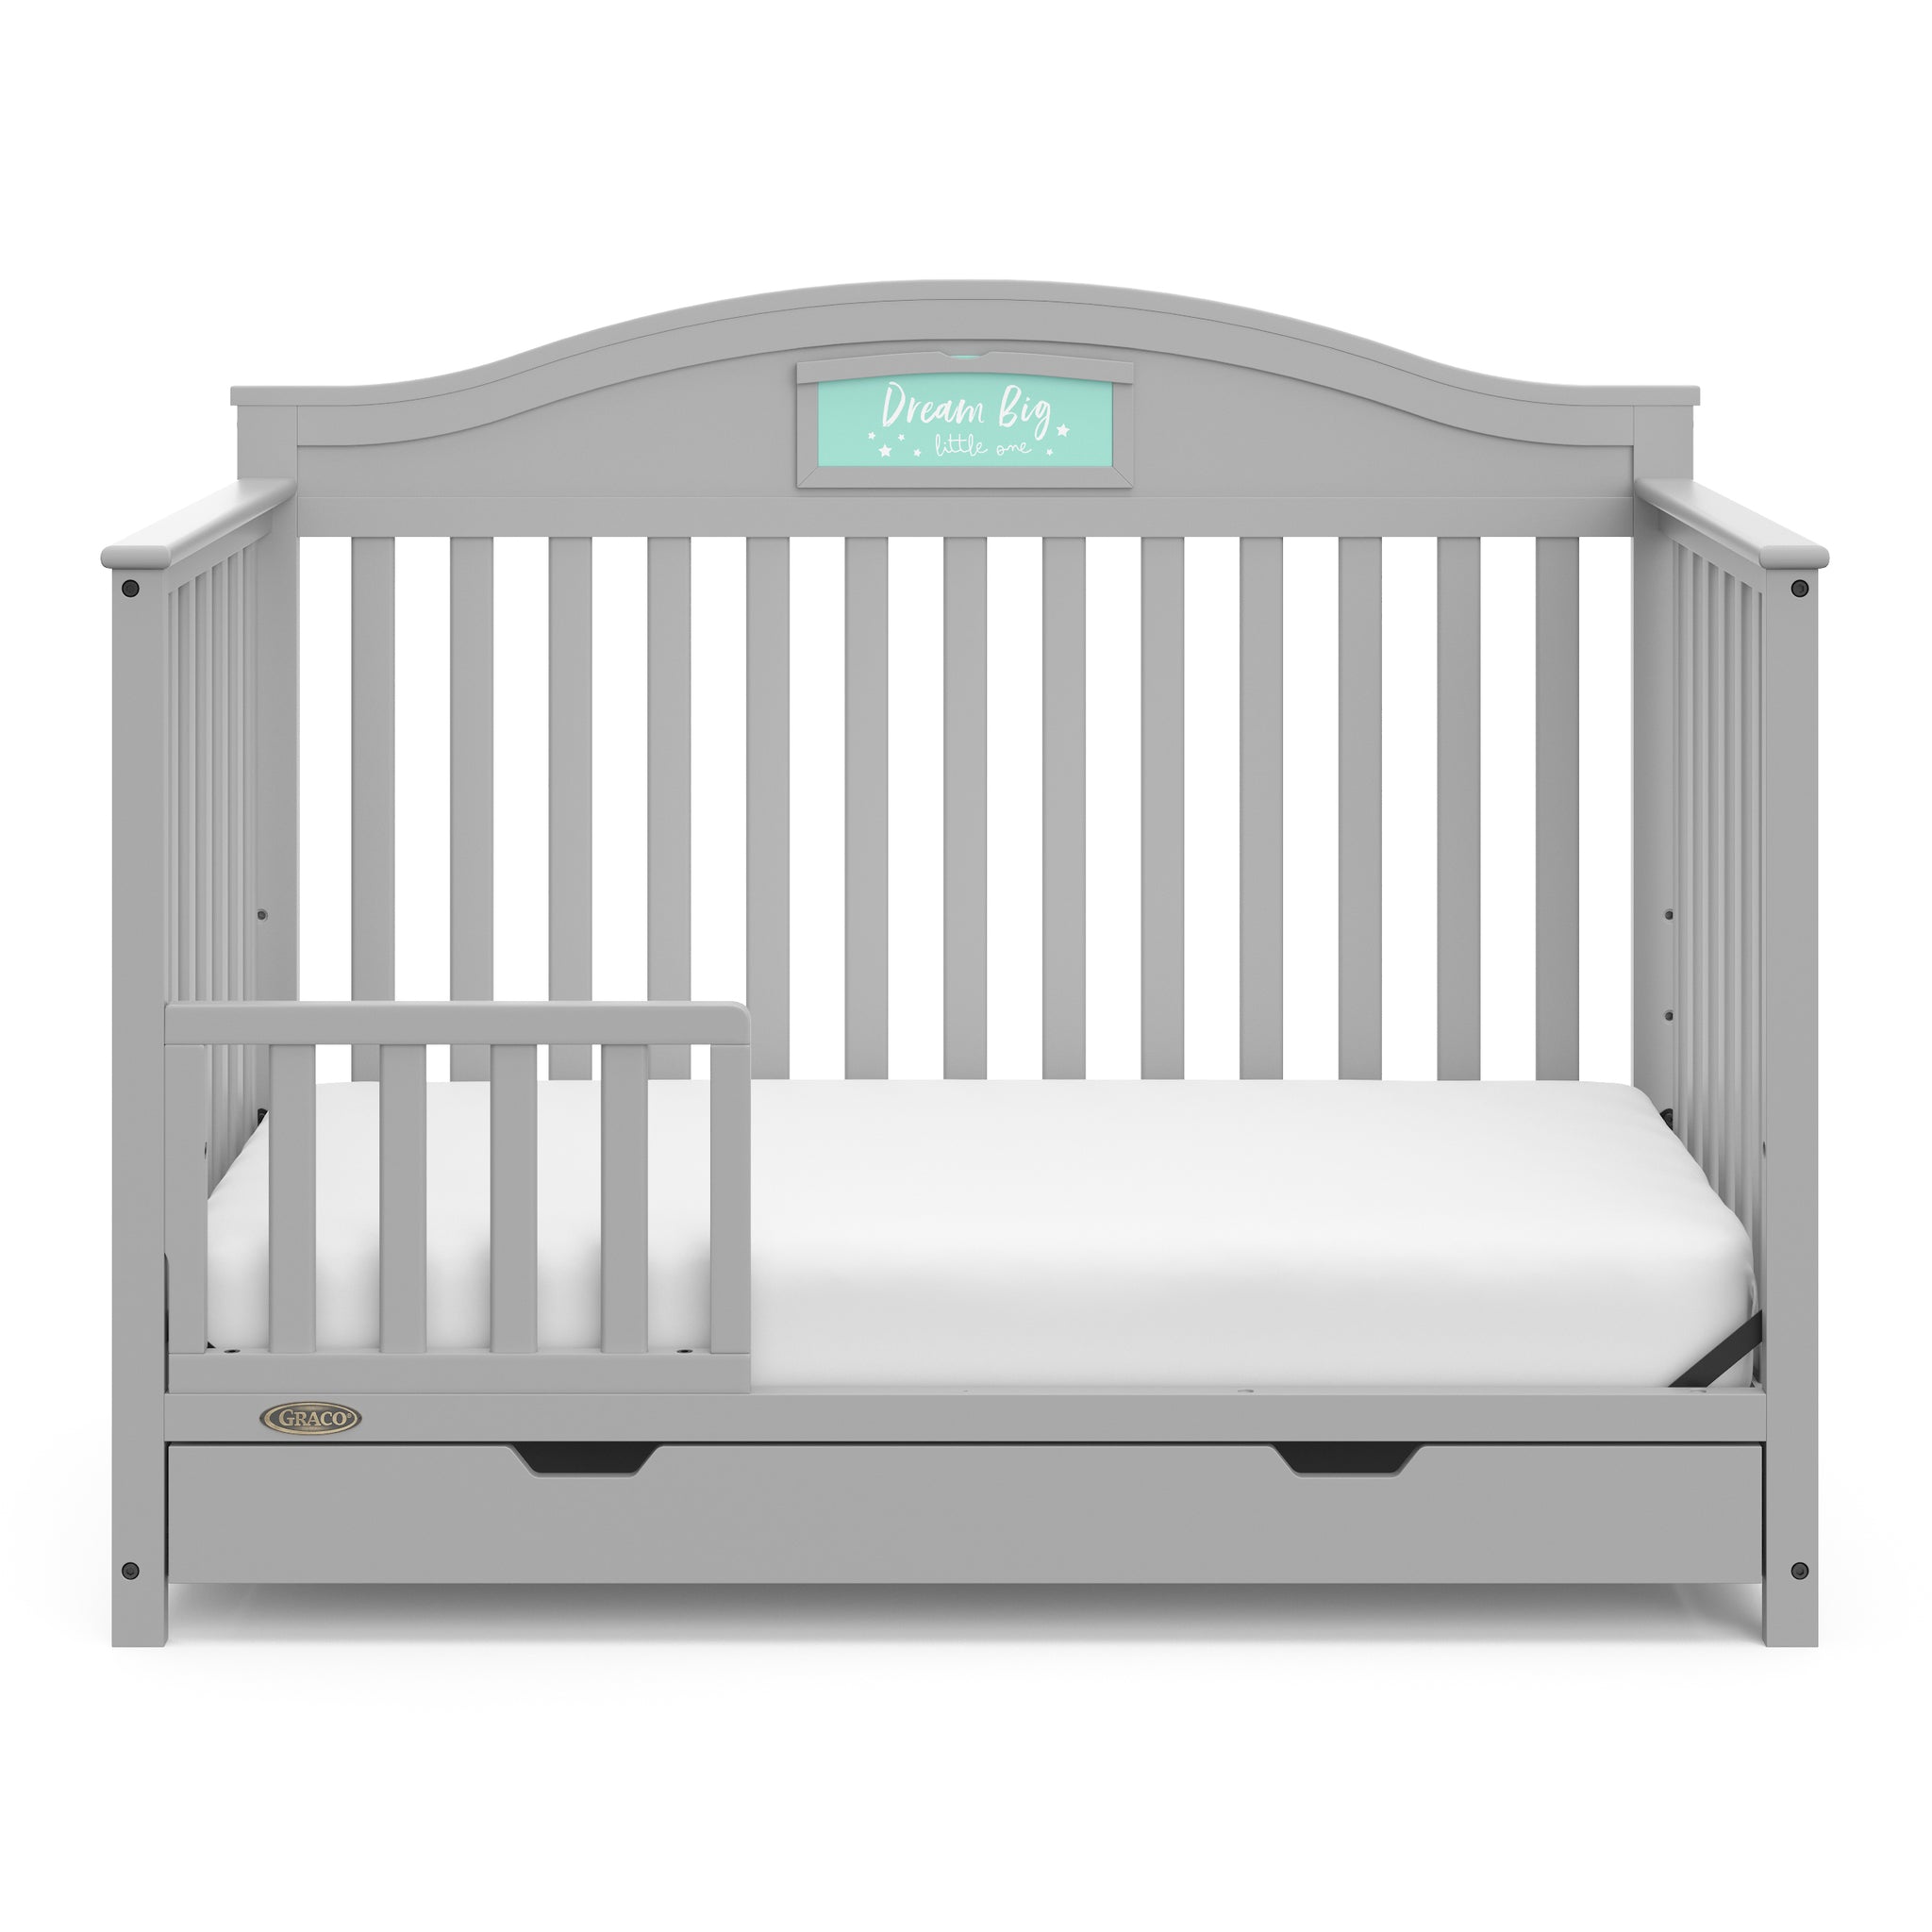 Pebble gray crib with drawer in toddler bed conversion with one safety guardrail